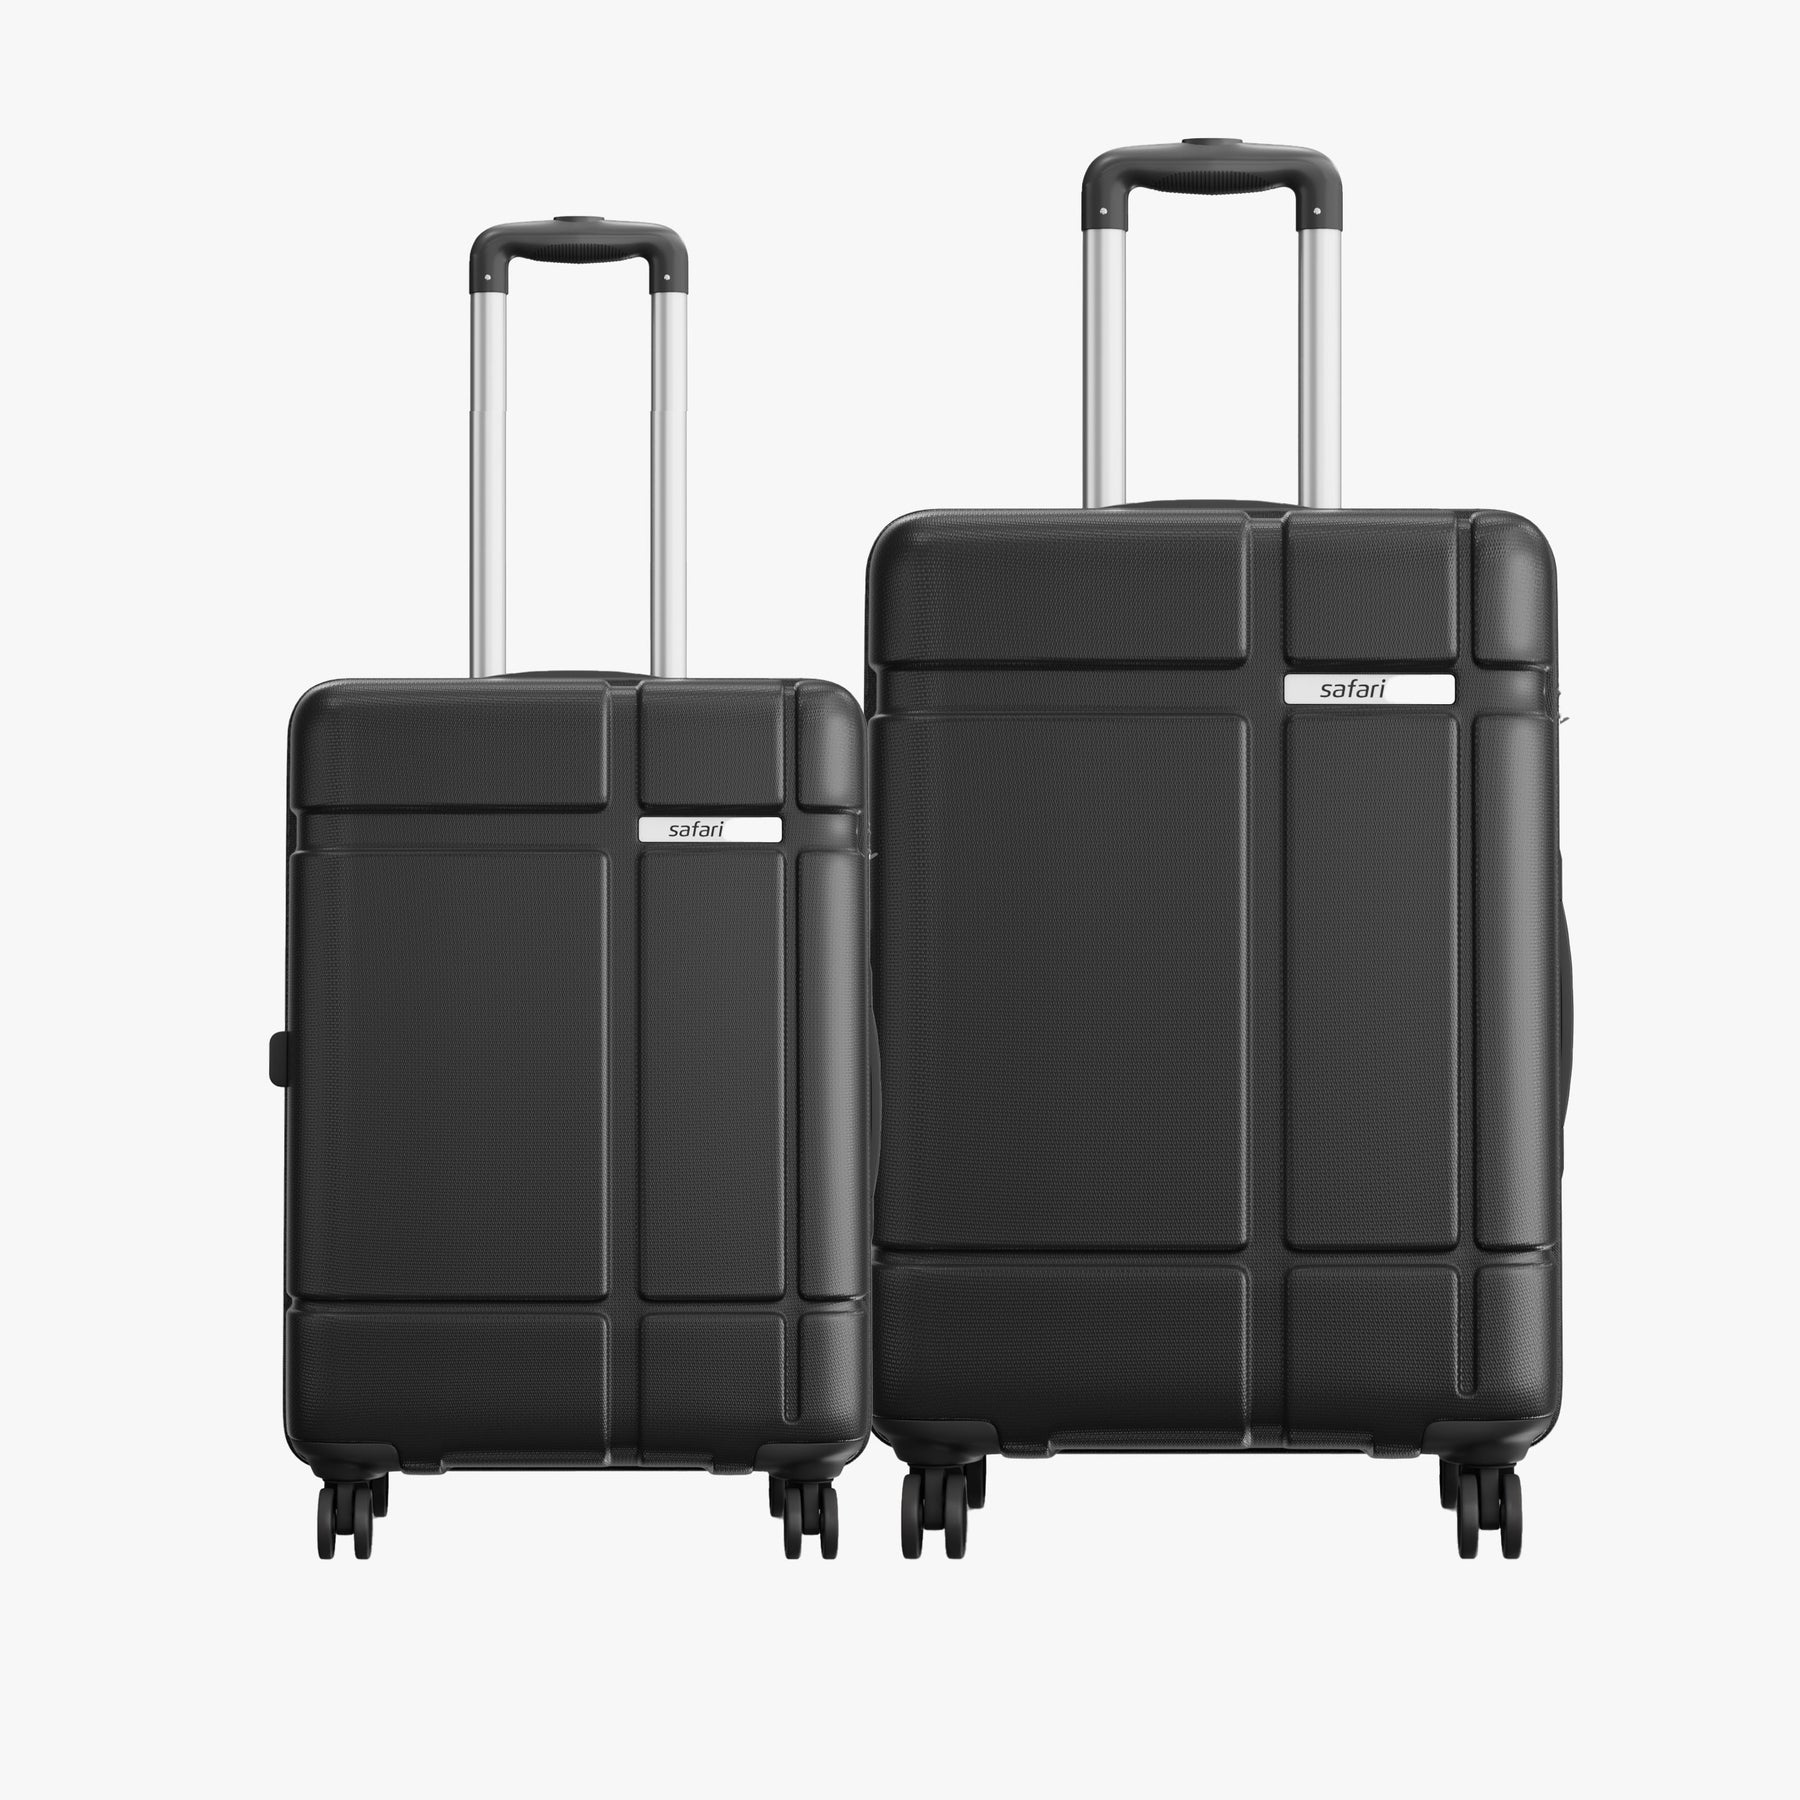 Route Hard Luggage With Dual Wheels Combo (Small and Medium) - Black